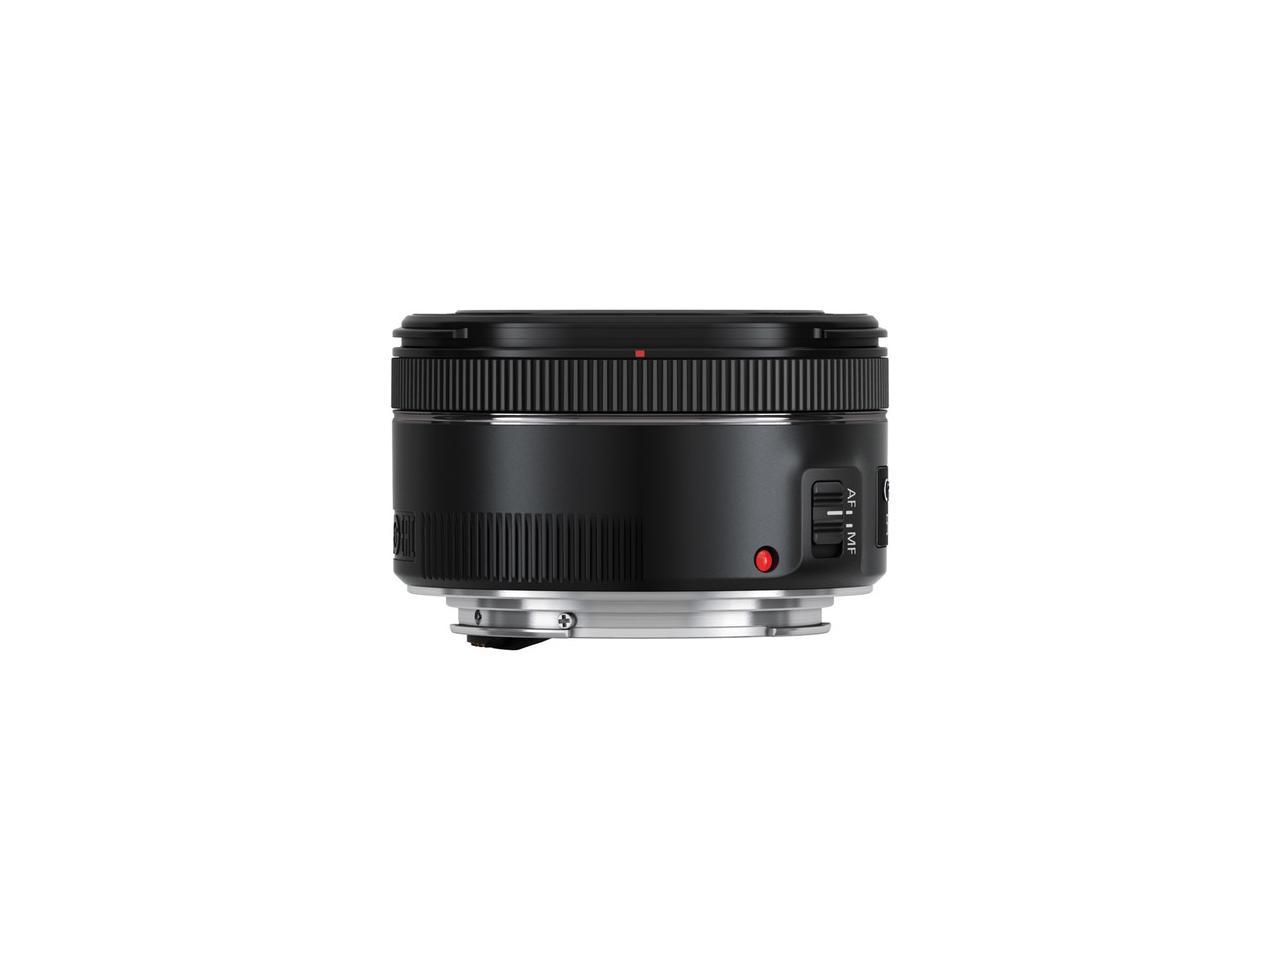 Canon 50mm f/1.8 Fixed Focal Length Lens for Canon EF